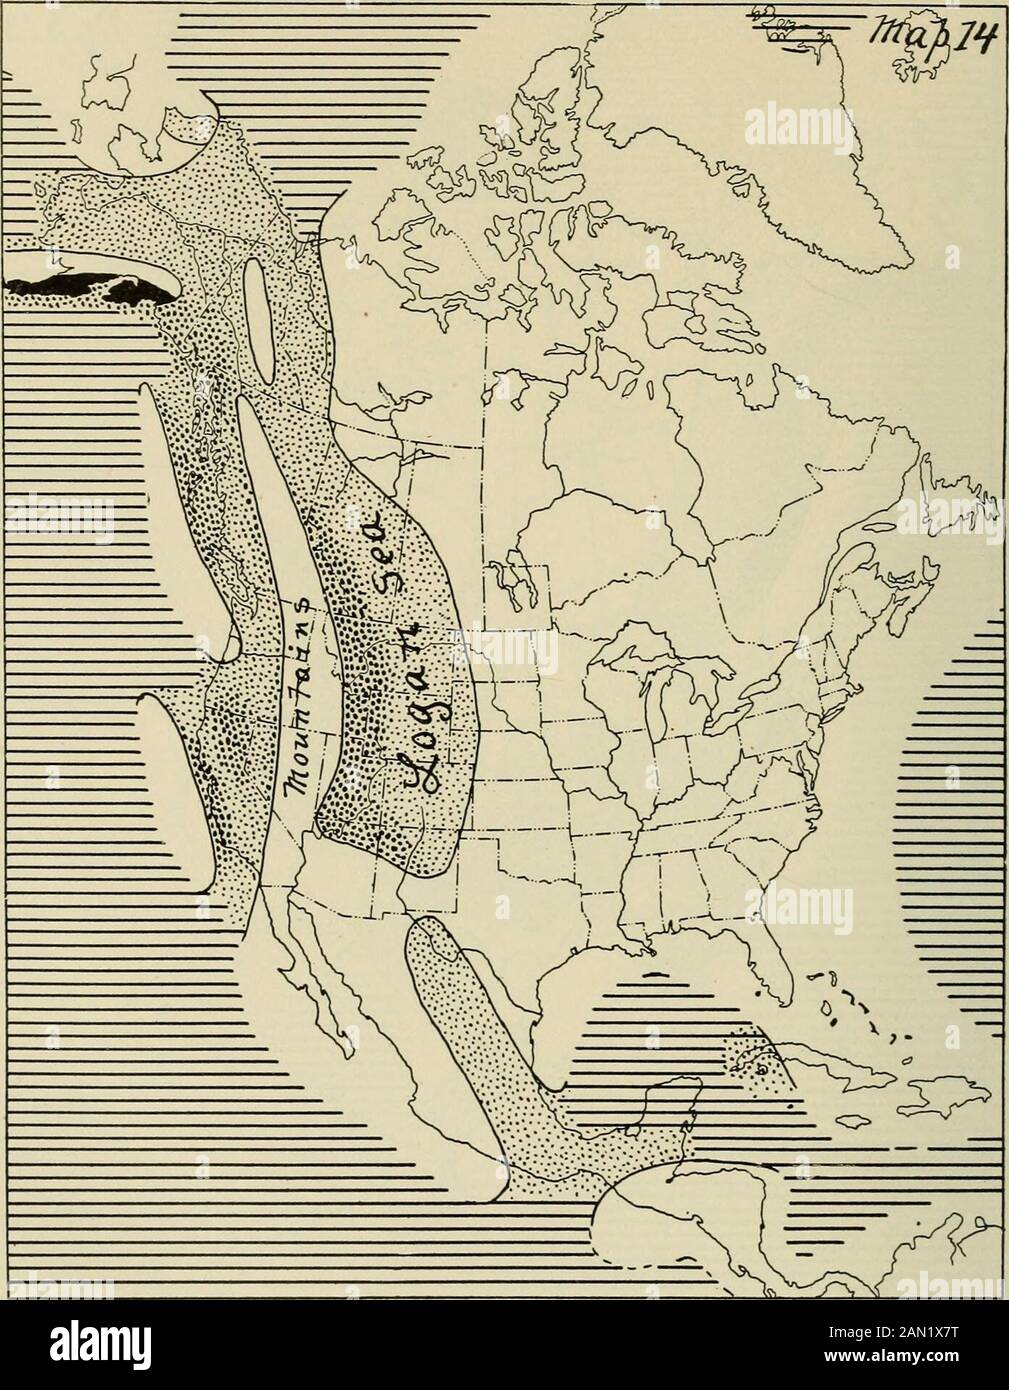 Bulletin of the Geological Society of America . Figure 13.—Pacific Geosyncline, Arctic and Mexican Seas of late Triassic Time Areas of fresh-water red deposits in east and southwest. Shading indicates areas of greatest subsidence. 226 C. SCIIUCHERT TPTE XORTH AMERICAX GEOSYNCLIXES. Figure 14.—Pacific and Mexican Geosynclines and Logan Sea of early Upper Jurassic Time Shading indicates areas of greatest subsidence. ILLUSTRATIONS 227 Stock Photo